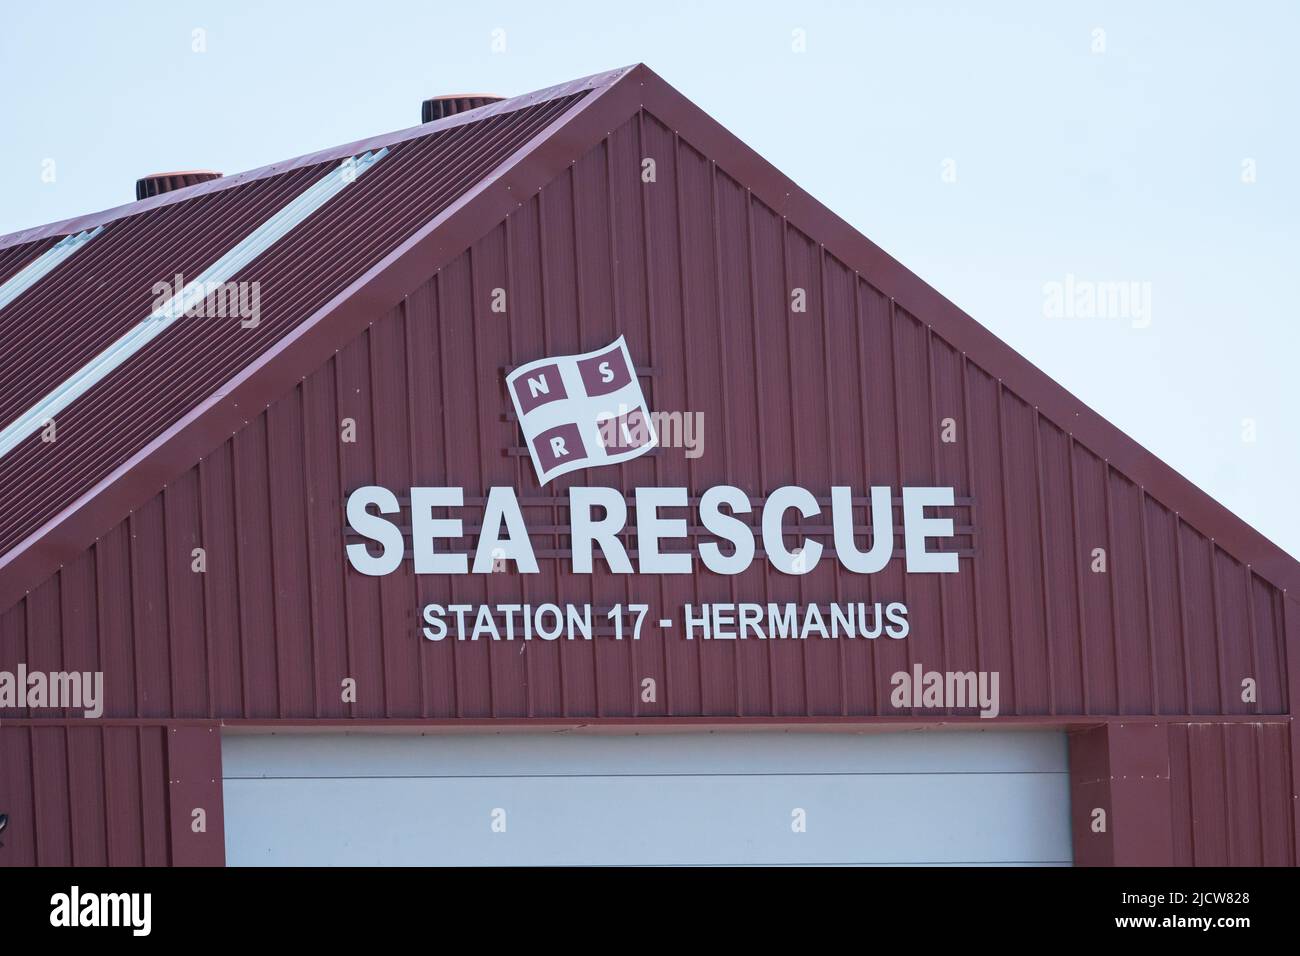 NSRI National Sea Rescue Institute Hermanus sign or signage on a shed or building in South Africa Stock Photo